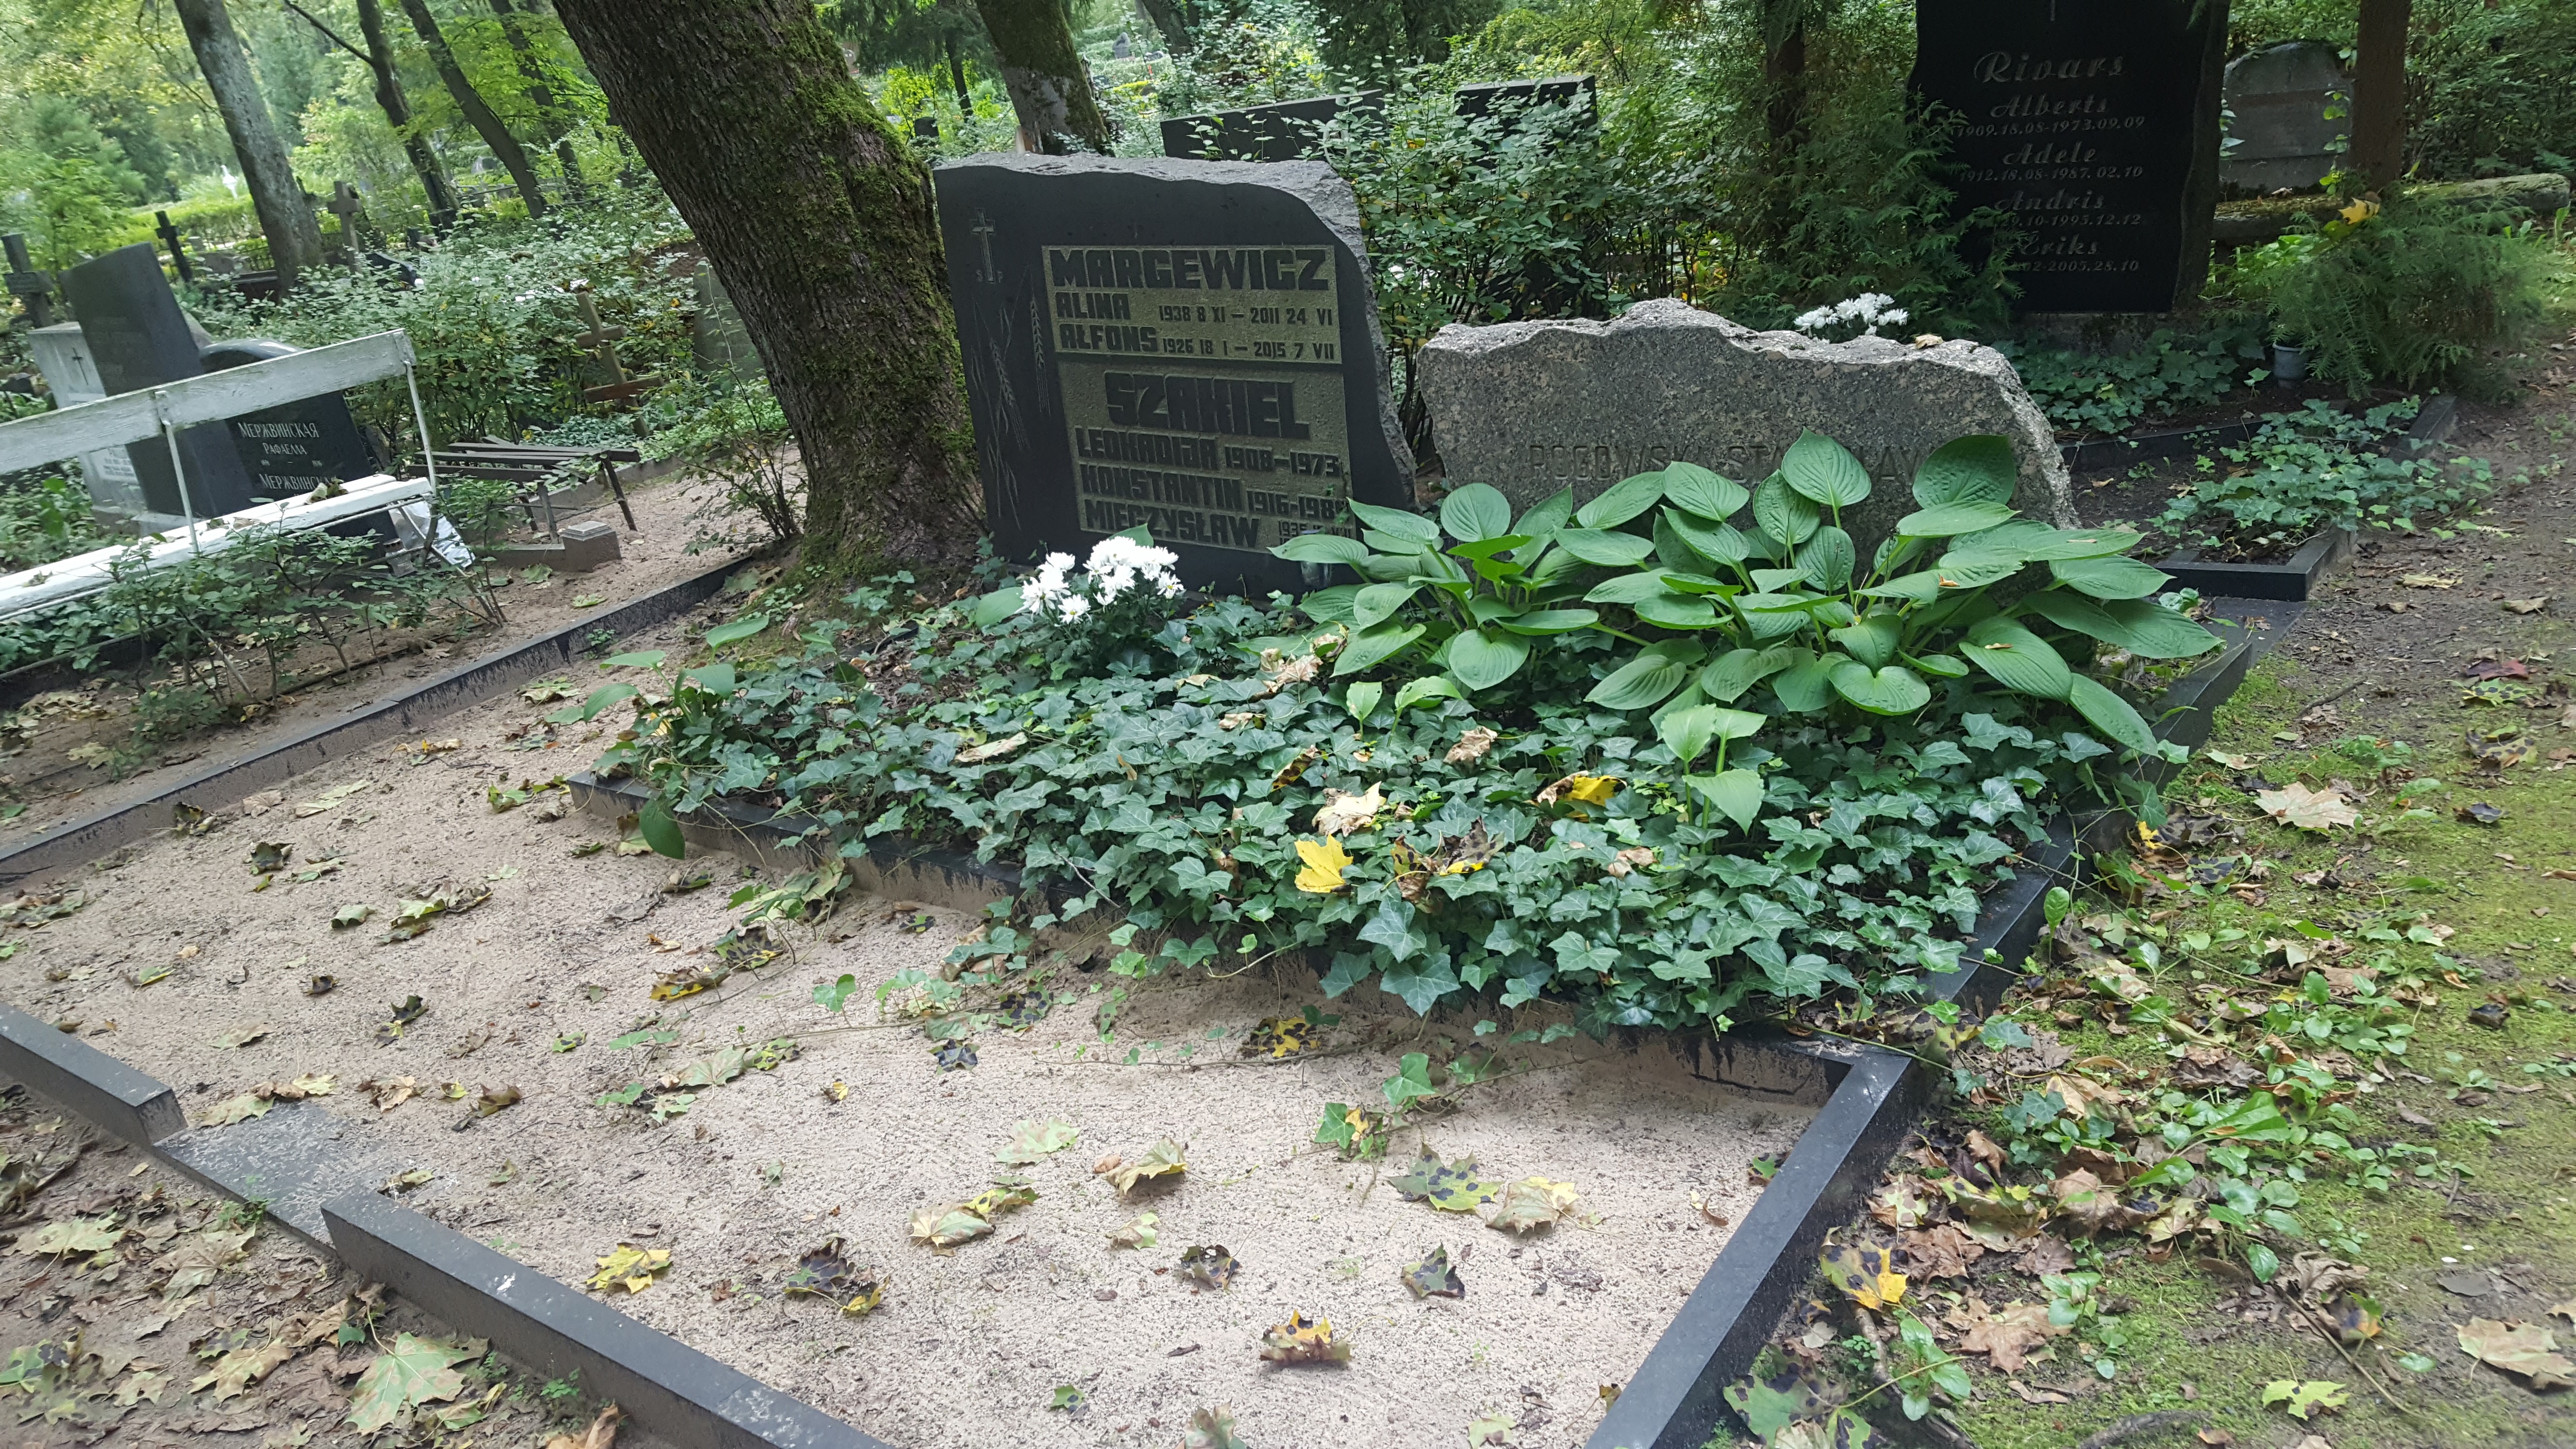 Tombstone of Stanislaw Rogowski, St Michael's cemetery in Riga, 2021 state